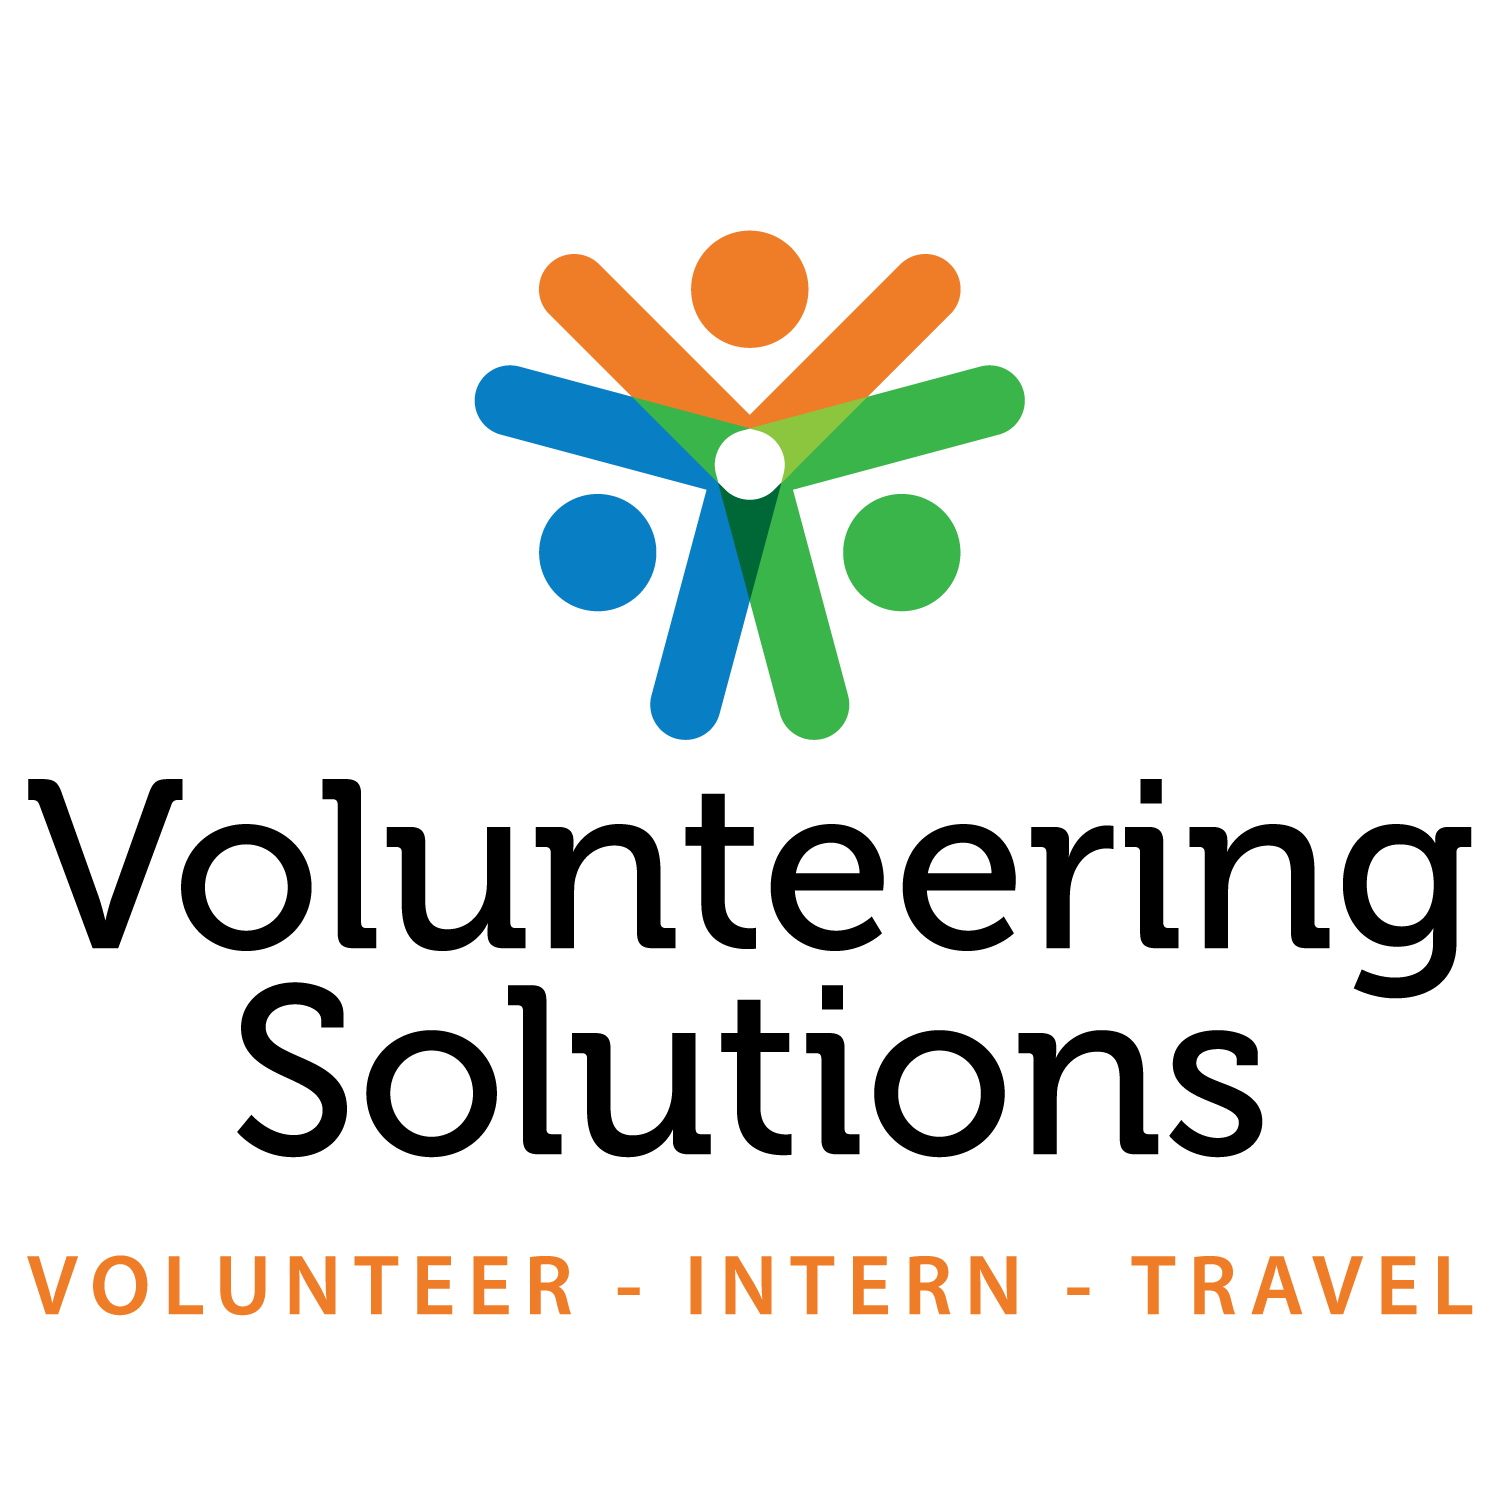 Volunteer Logo - Volunteering Solutions: A Transformation of The Logo And The Website